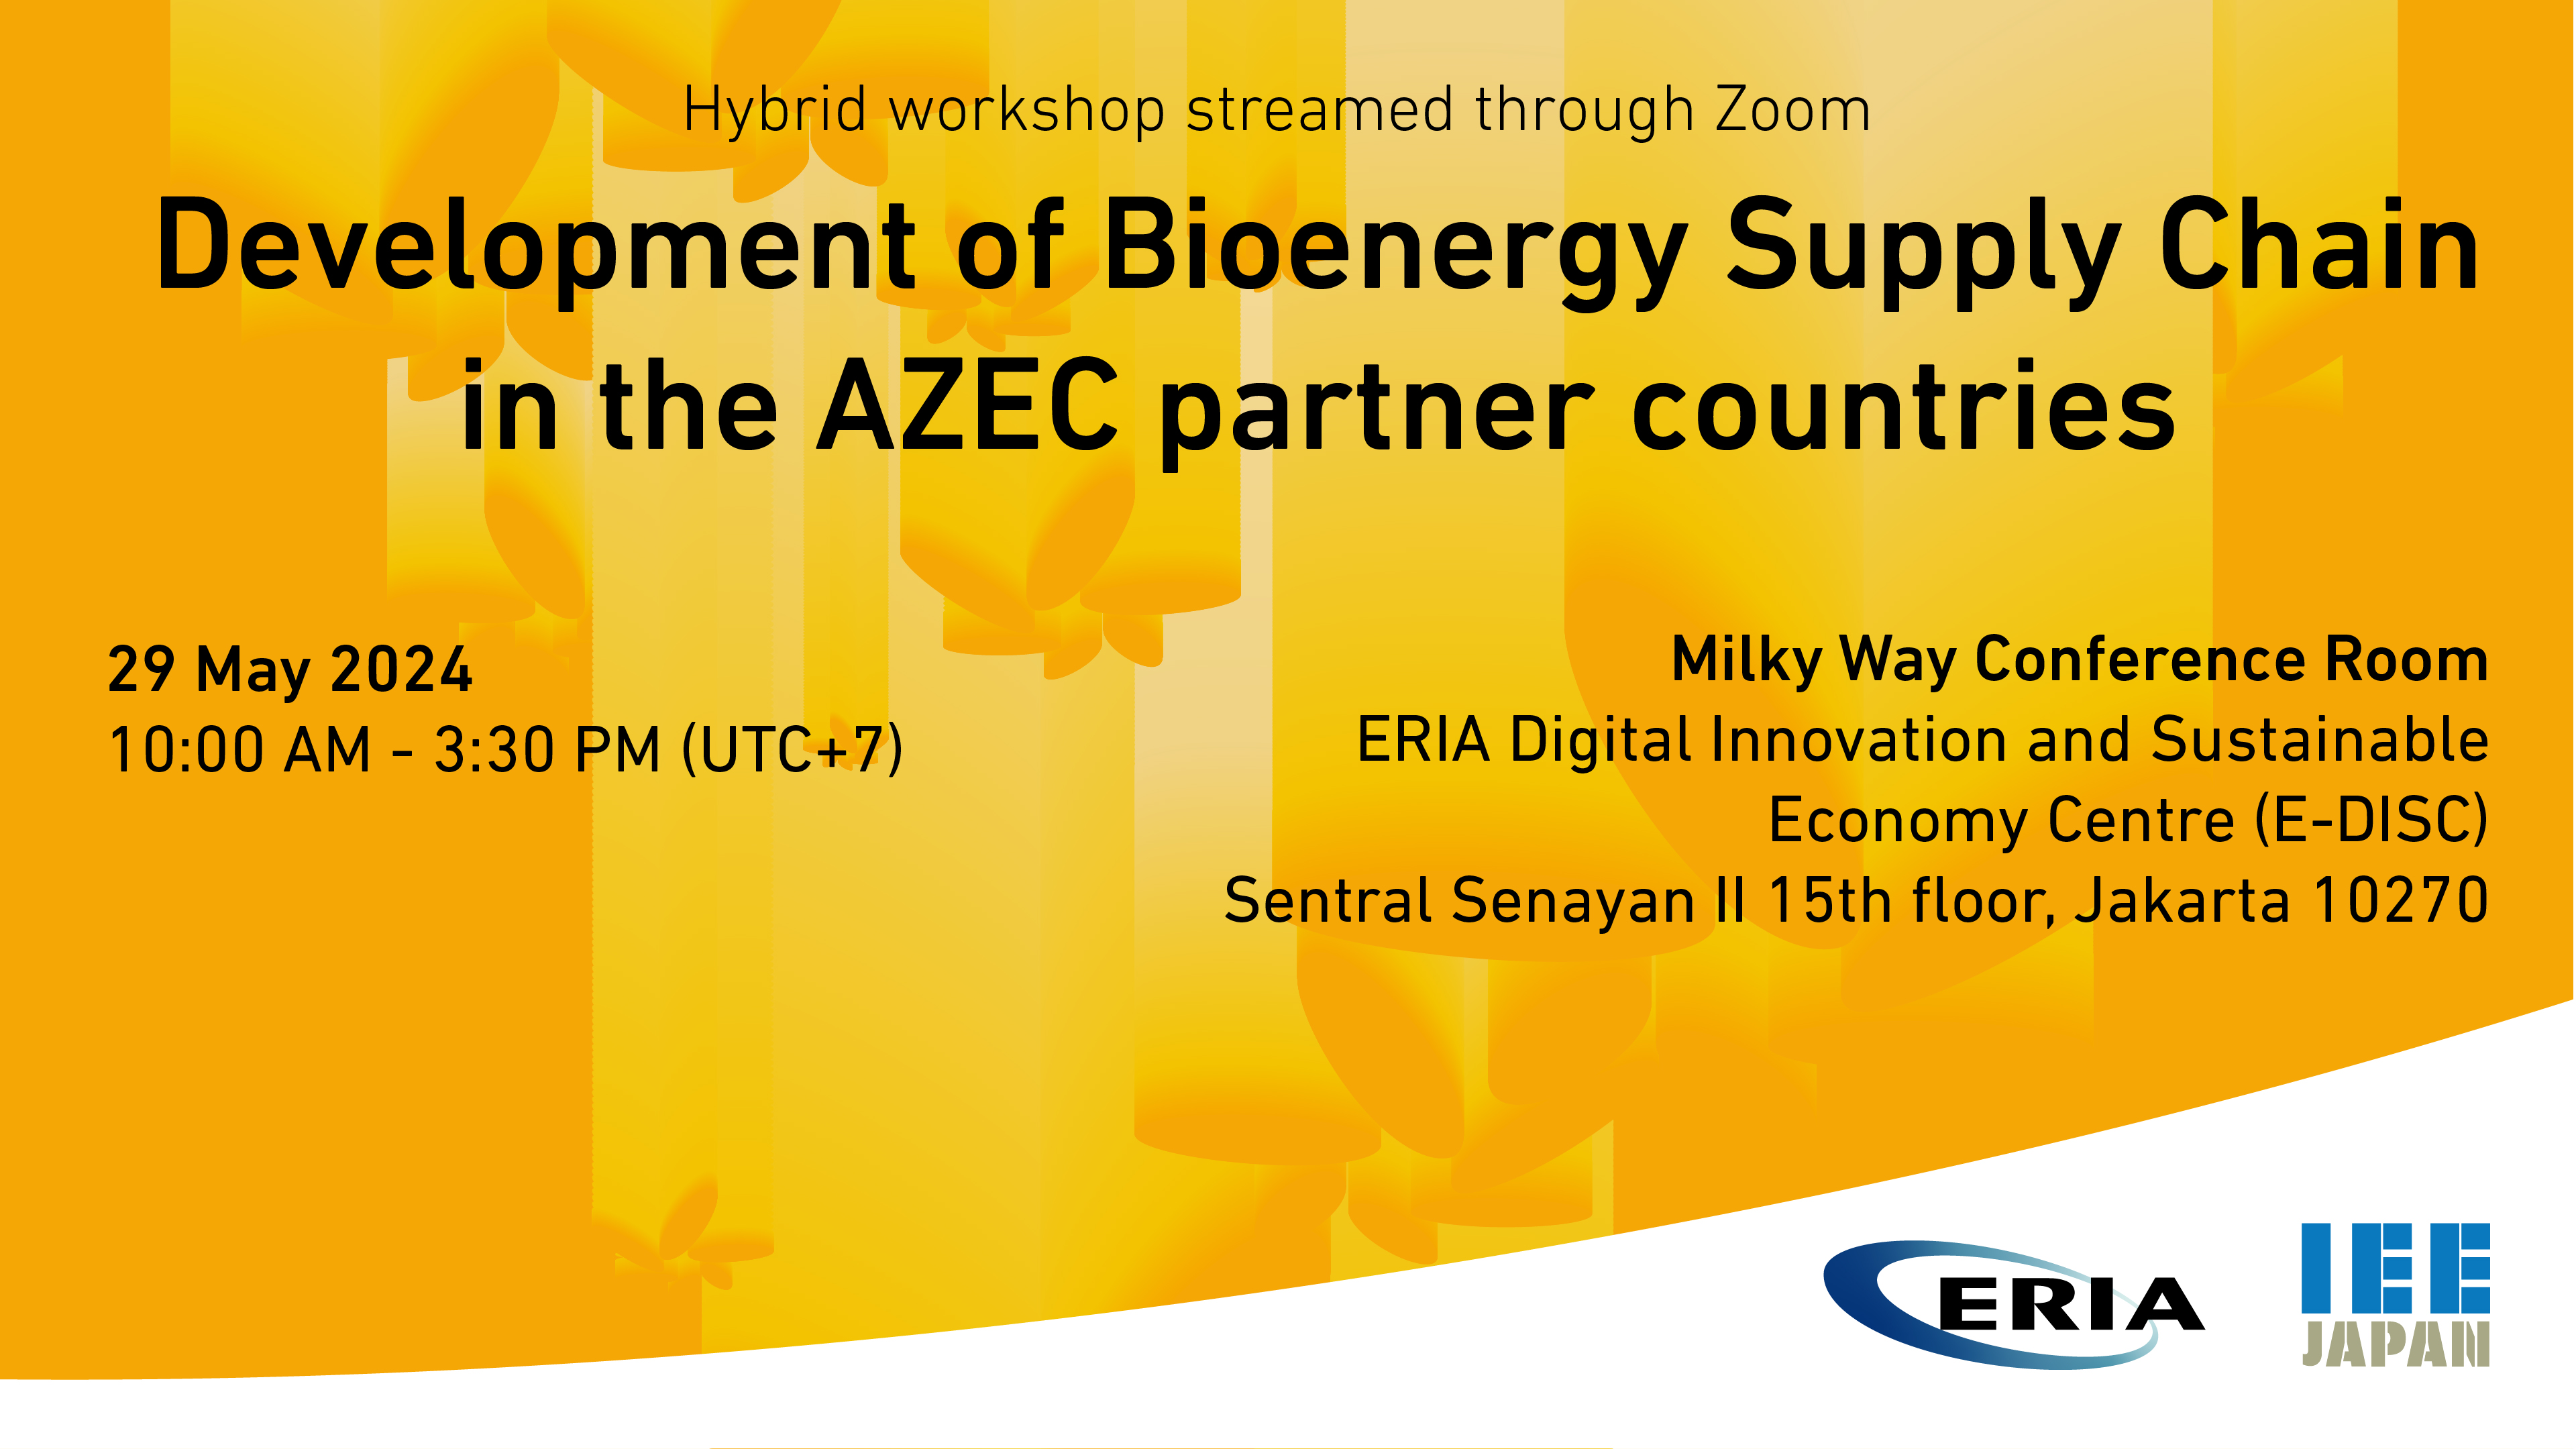 Workshop on Development of Bioenergy Supply Chain in the AZEC Partner Countries